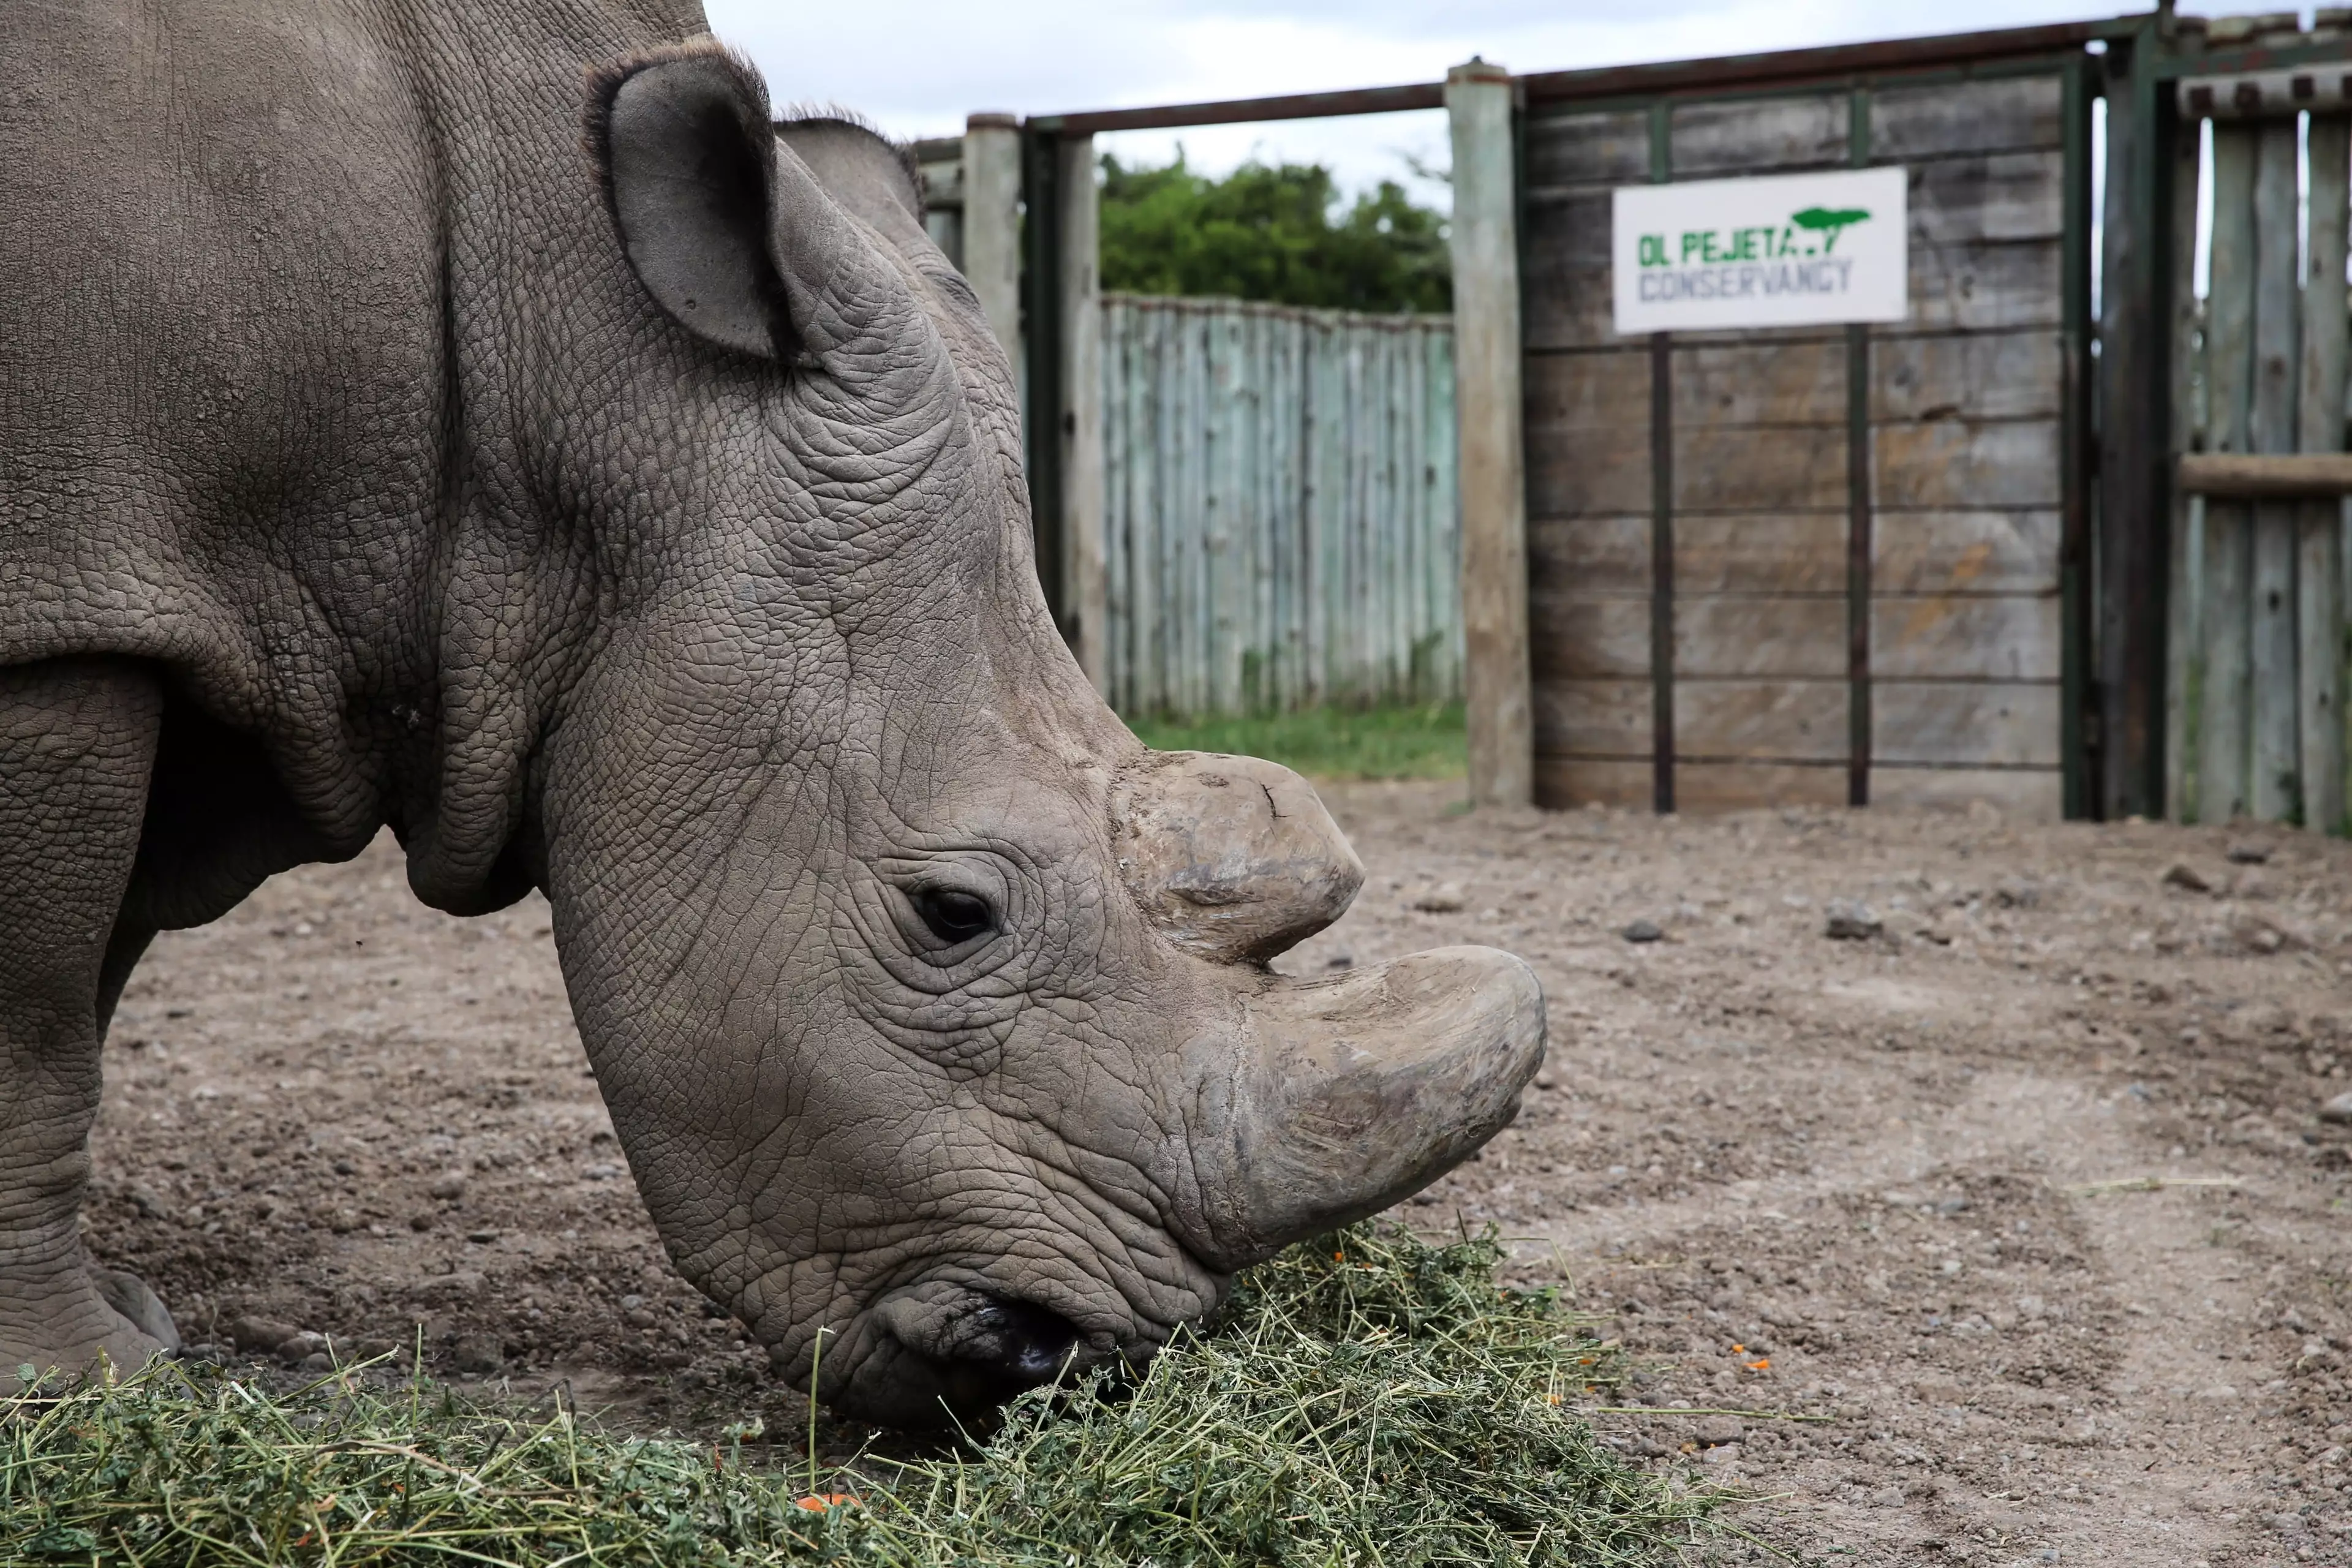 Sad Photos Emerge Of The Last Male Northern White Rhino's Final Moments